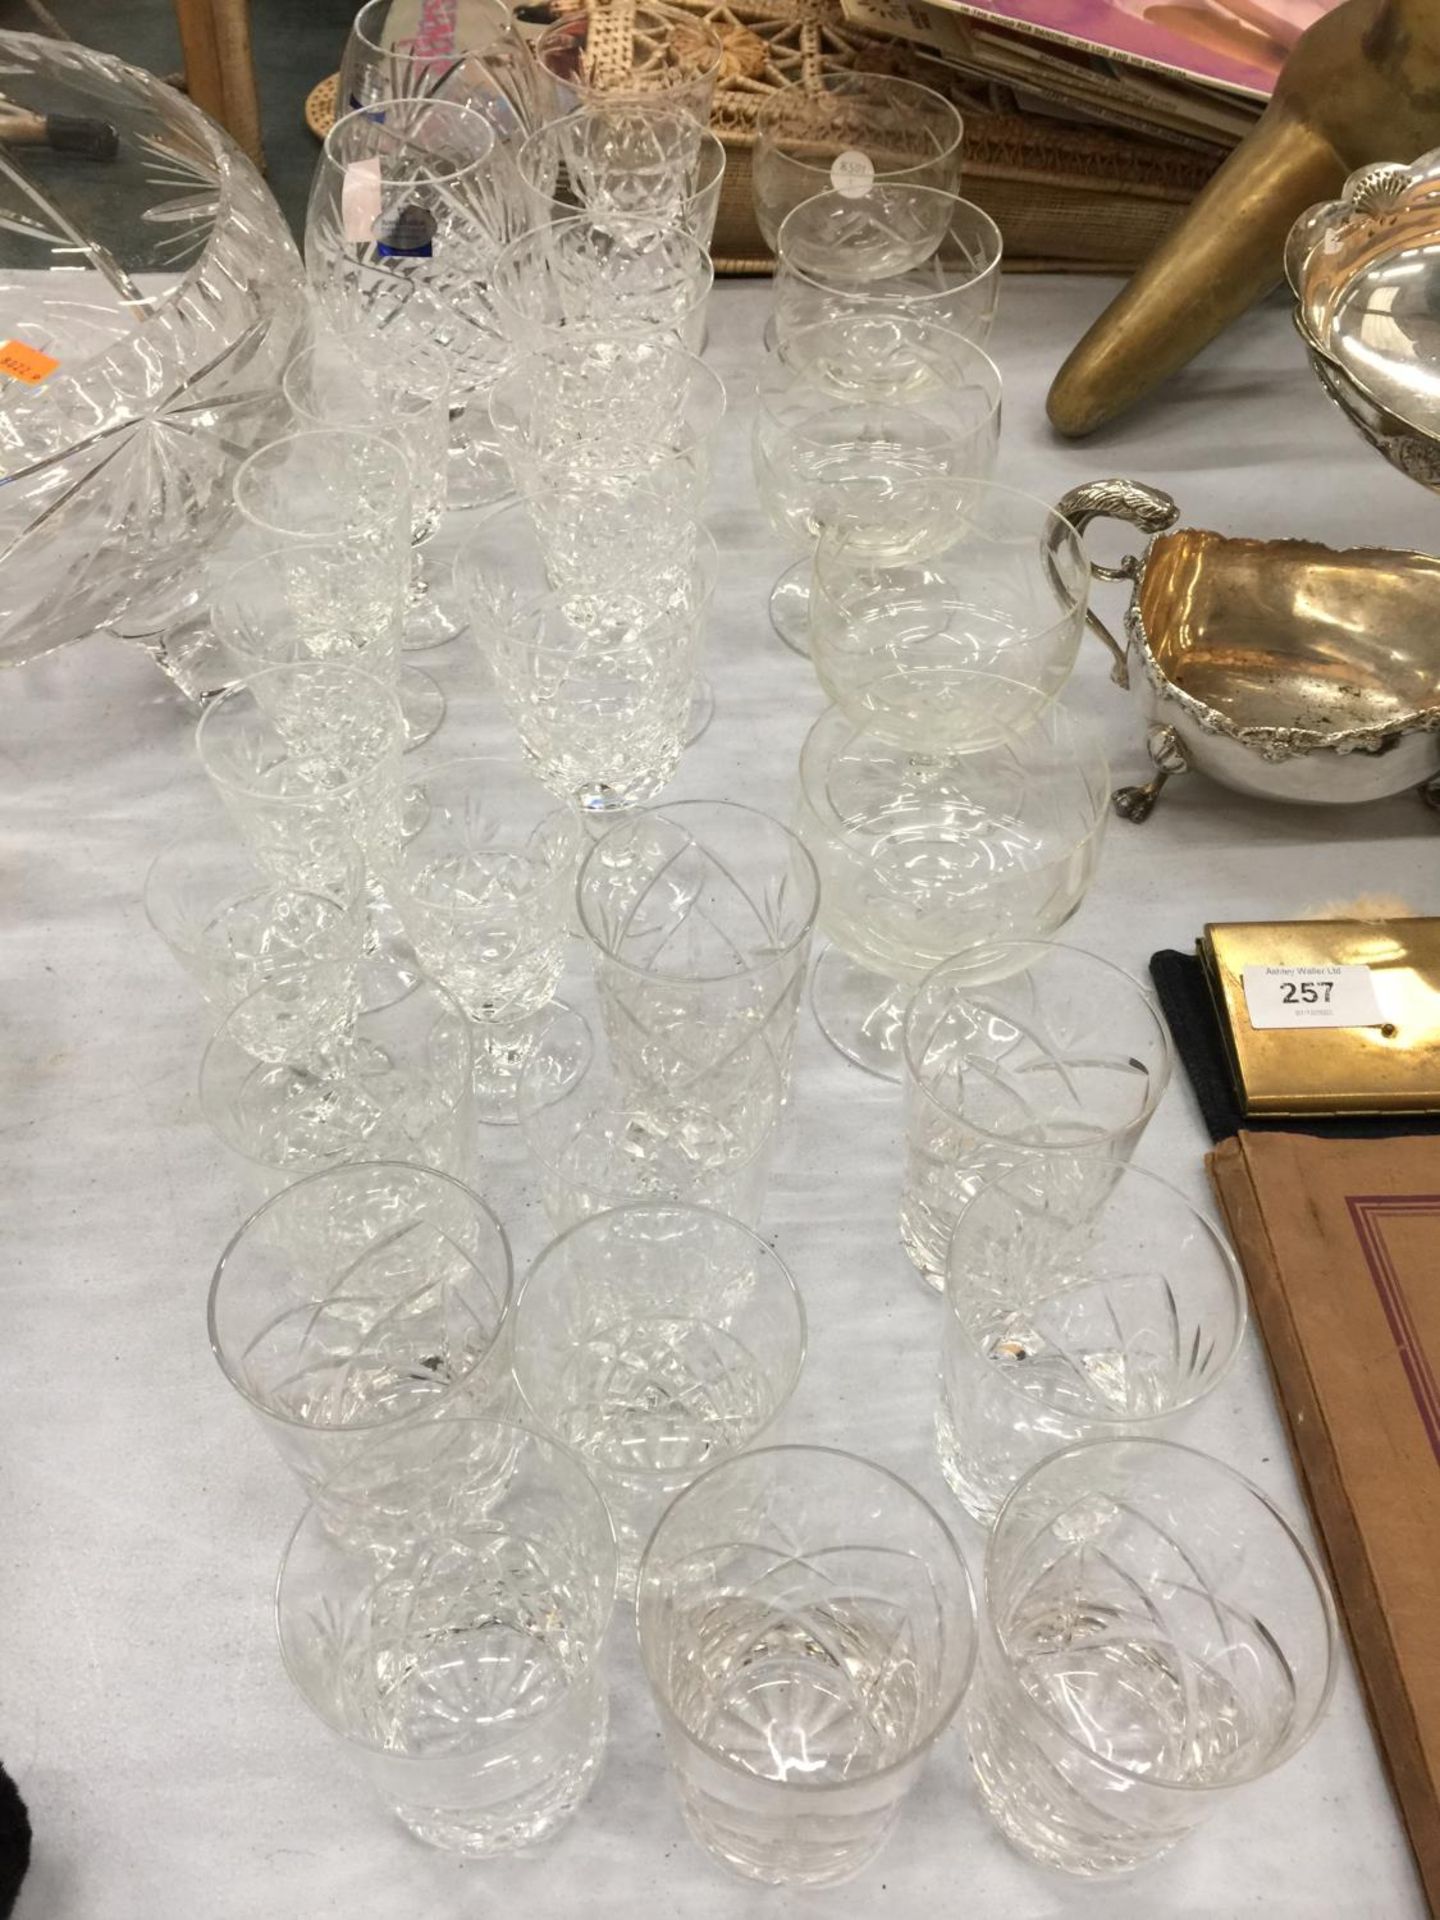 A LARGE QUANTITY OF CUT CRYSTAL GLASSES TO INCLUDE BRANDY BALLOONS, SHERRY, WHISKY, DESSERT BOWLS,